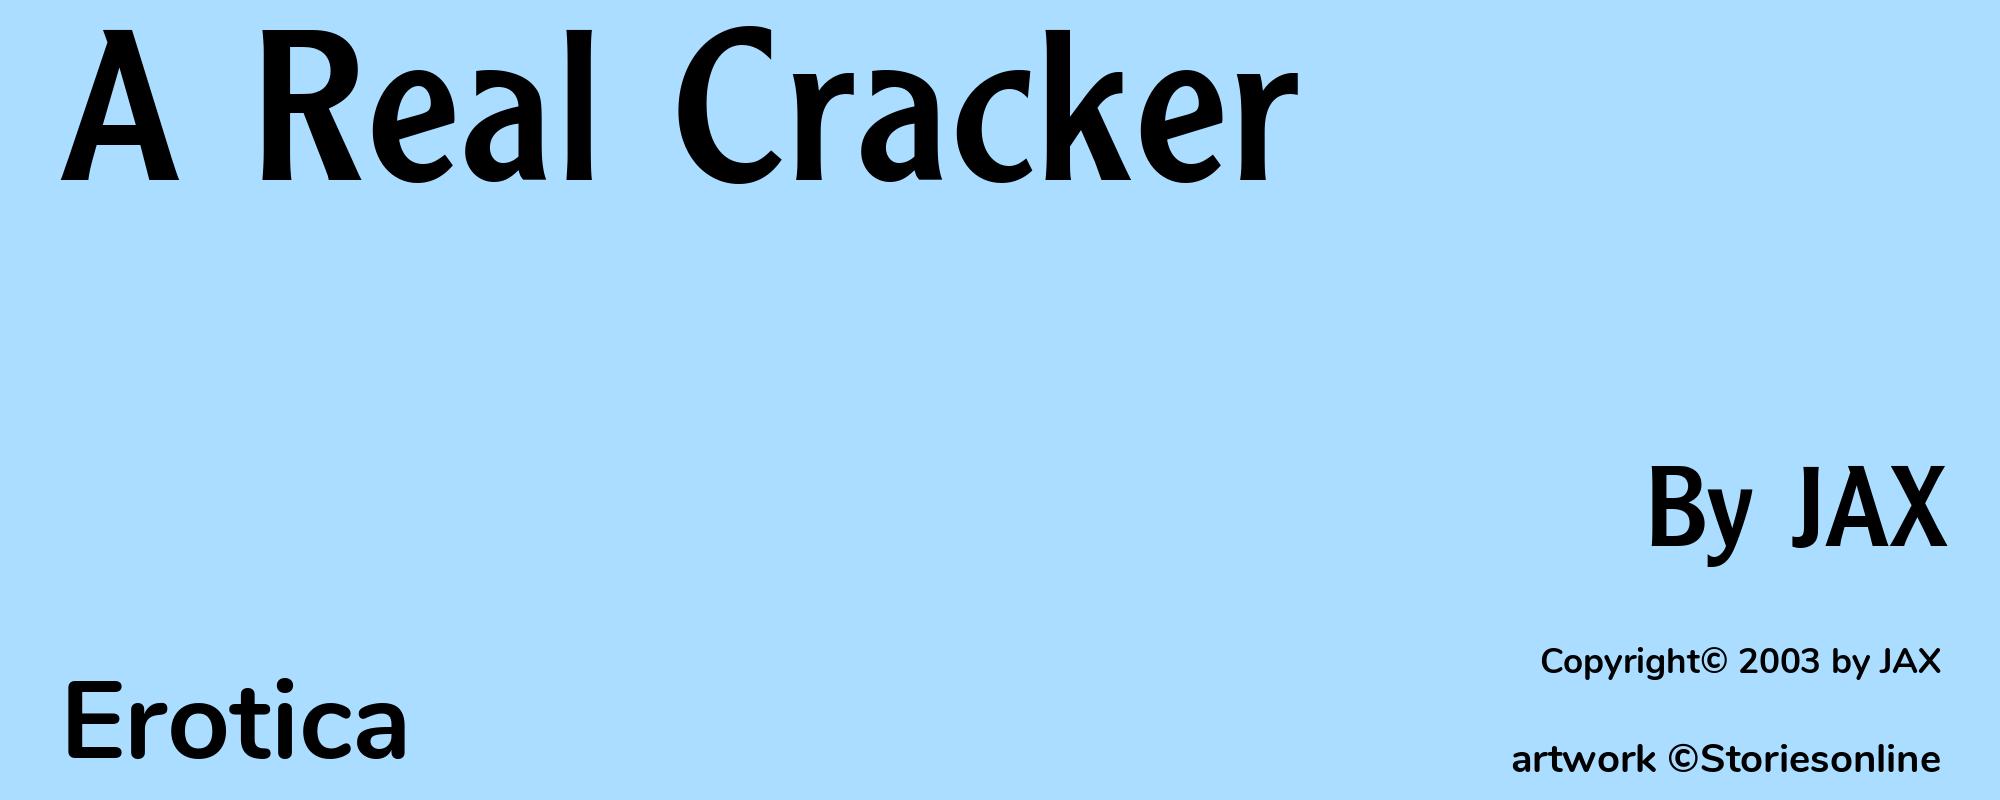 A Real Cracker - Cover